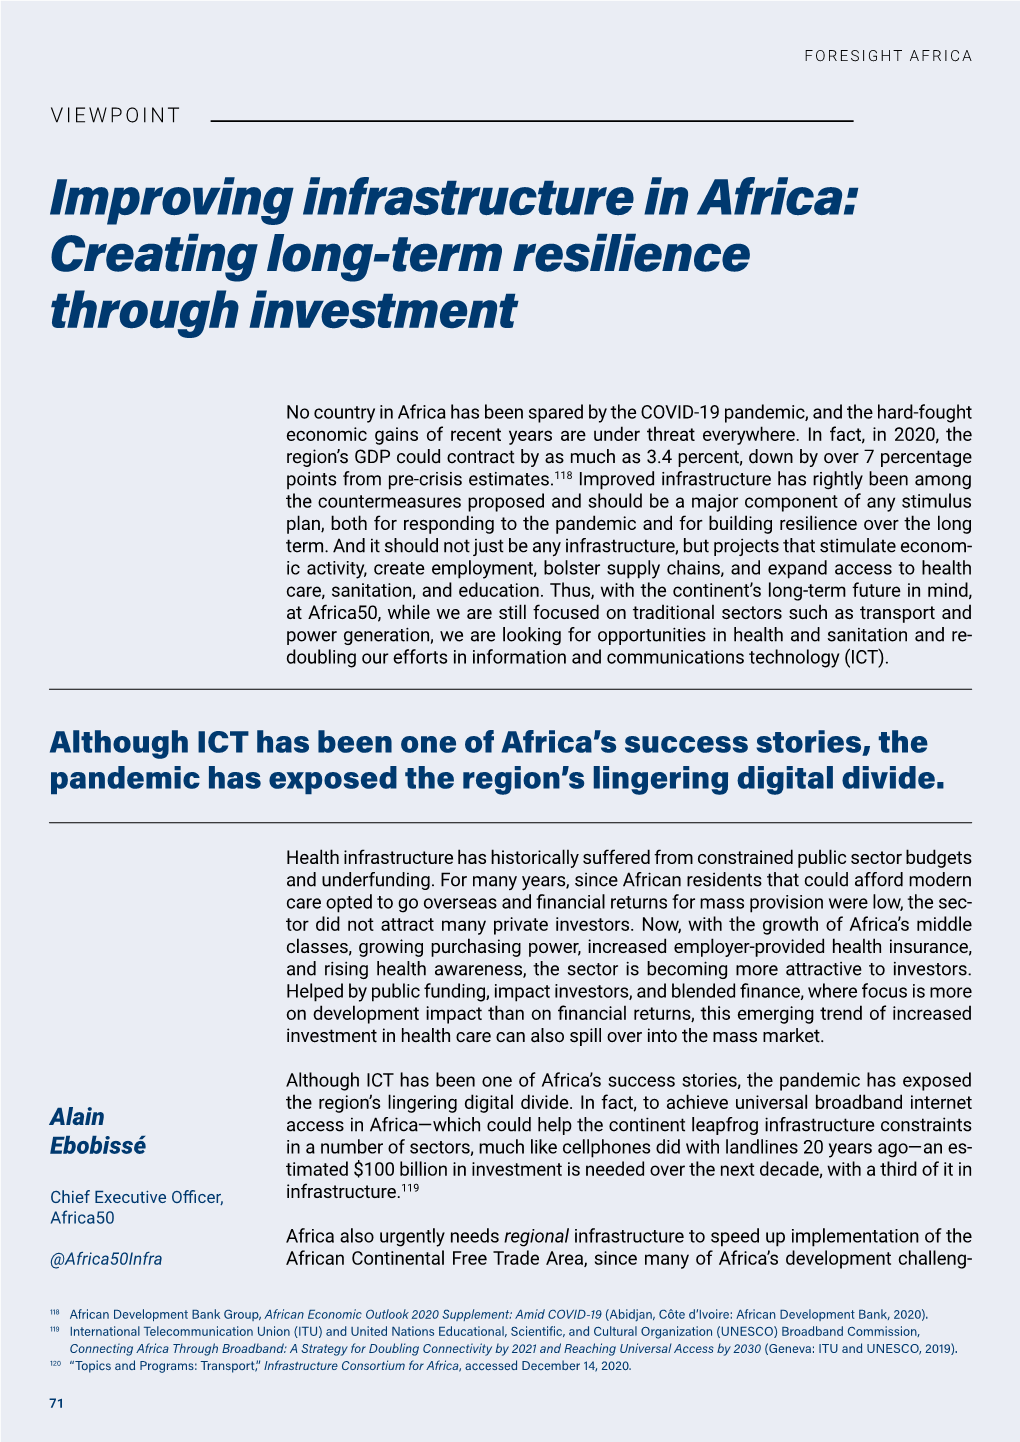 Improving Infrastructure in Africa: Creating Long-Term Resilience Through Investment